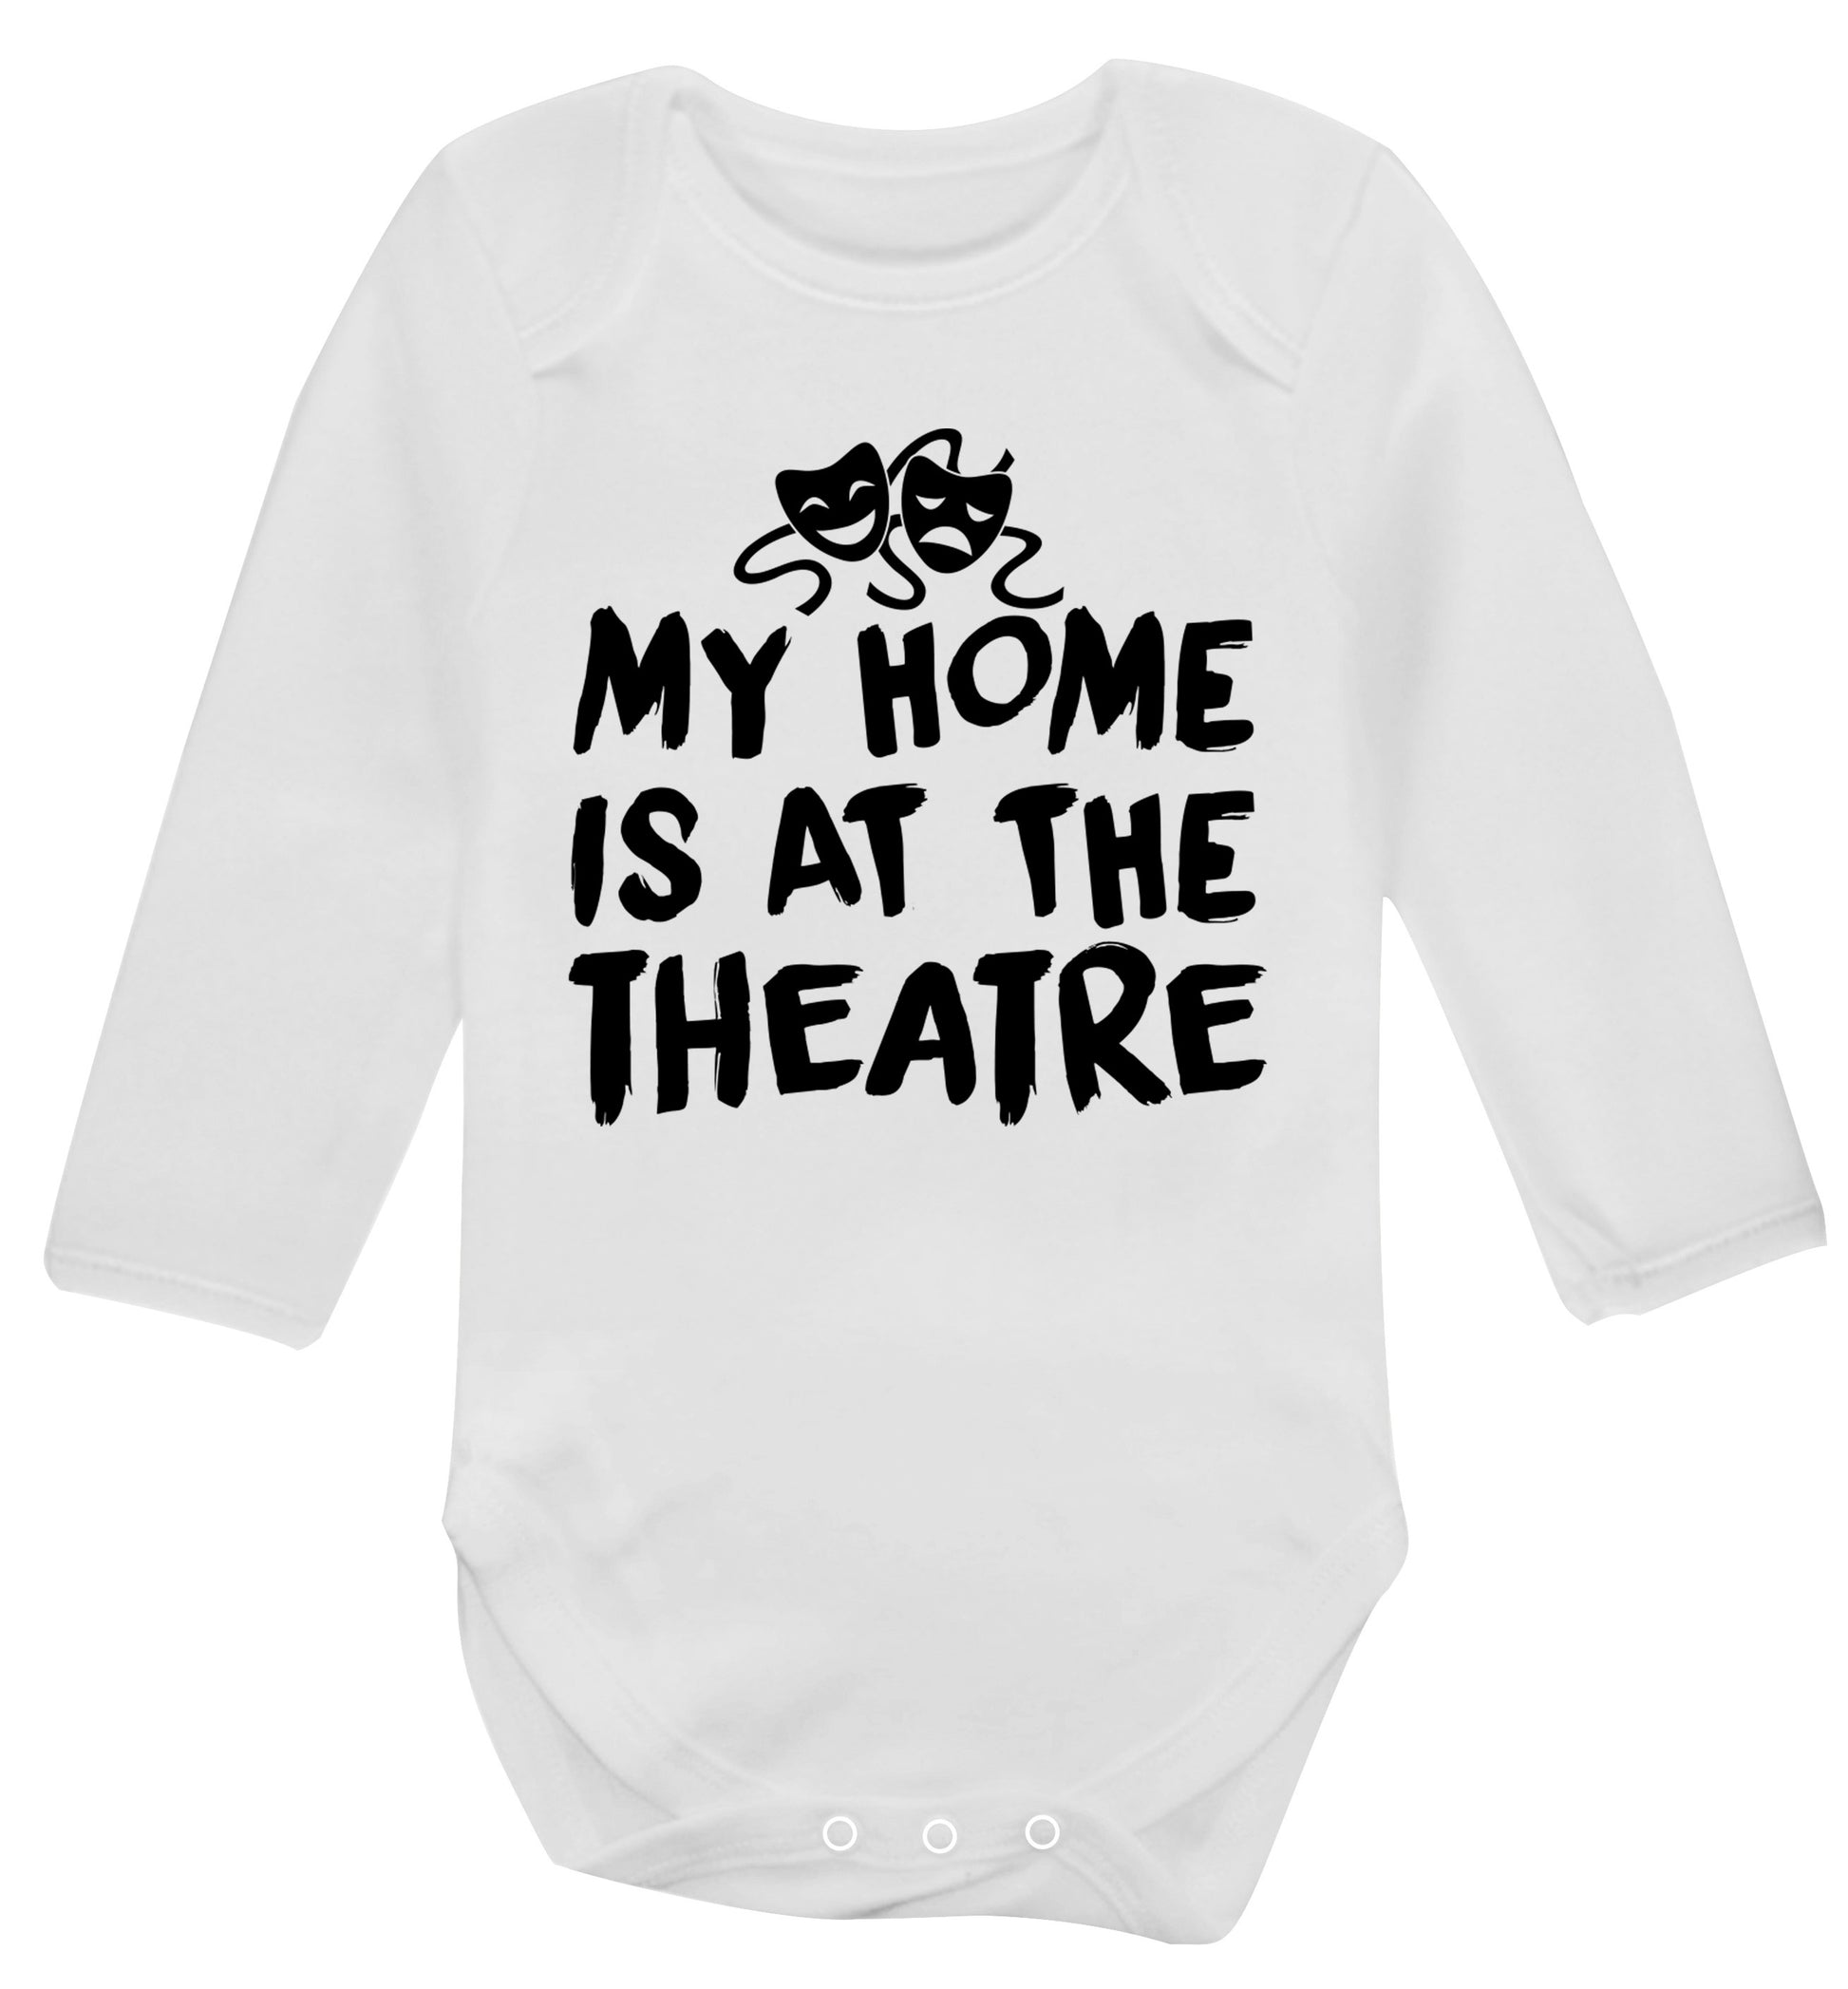 My home is at the theatre Baby Vest long sleeved white 6-12 months